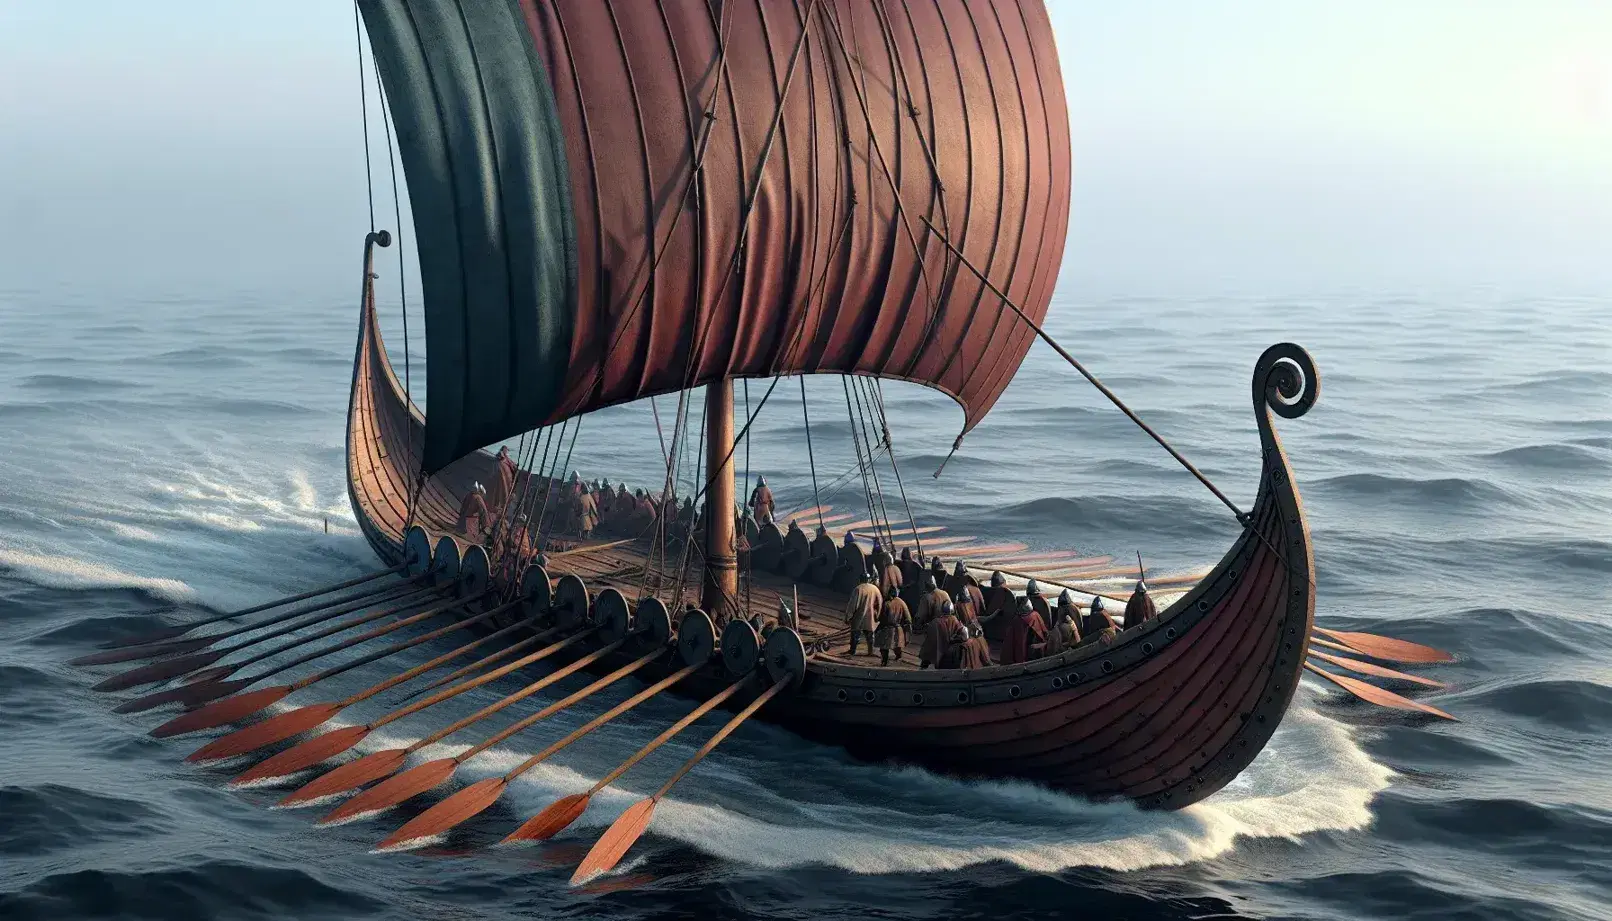 Viking longship at sea with dark brown hull, red square sail, and crew with oars in motion, under a clear pale blue sky, evoking Norse seafaring heritage.